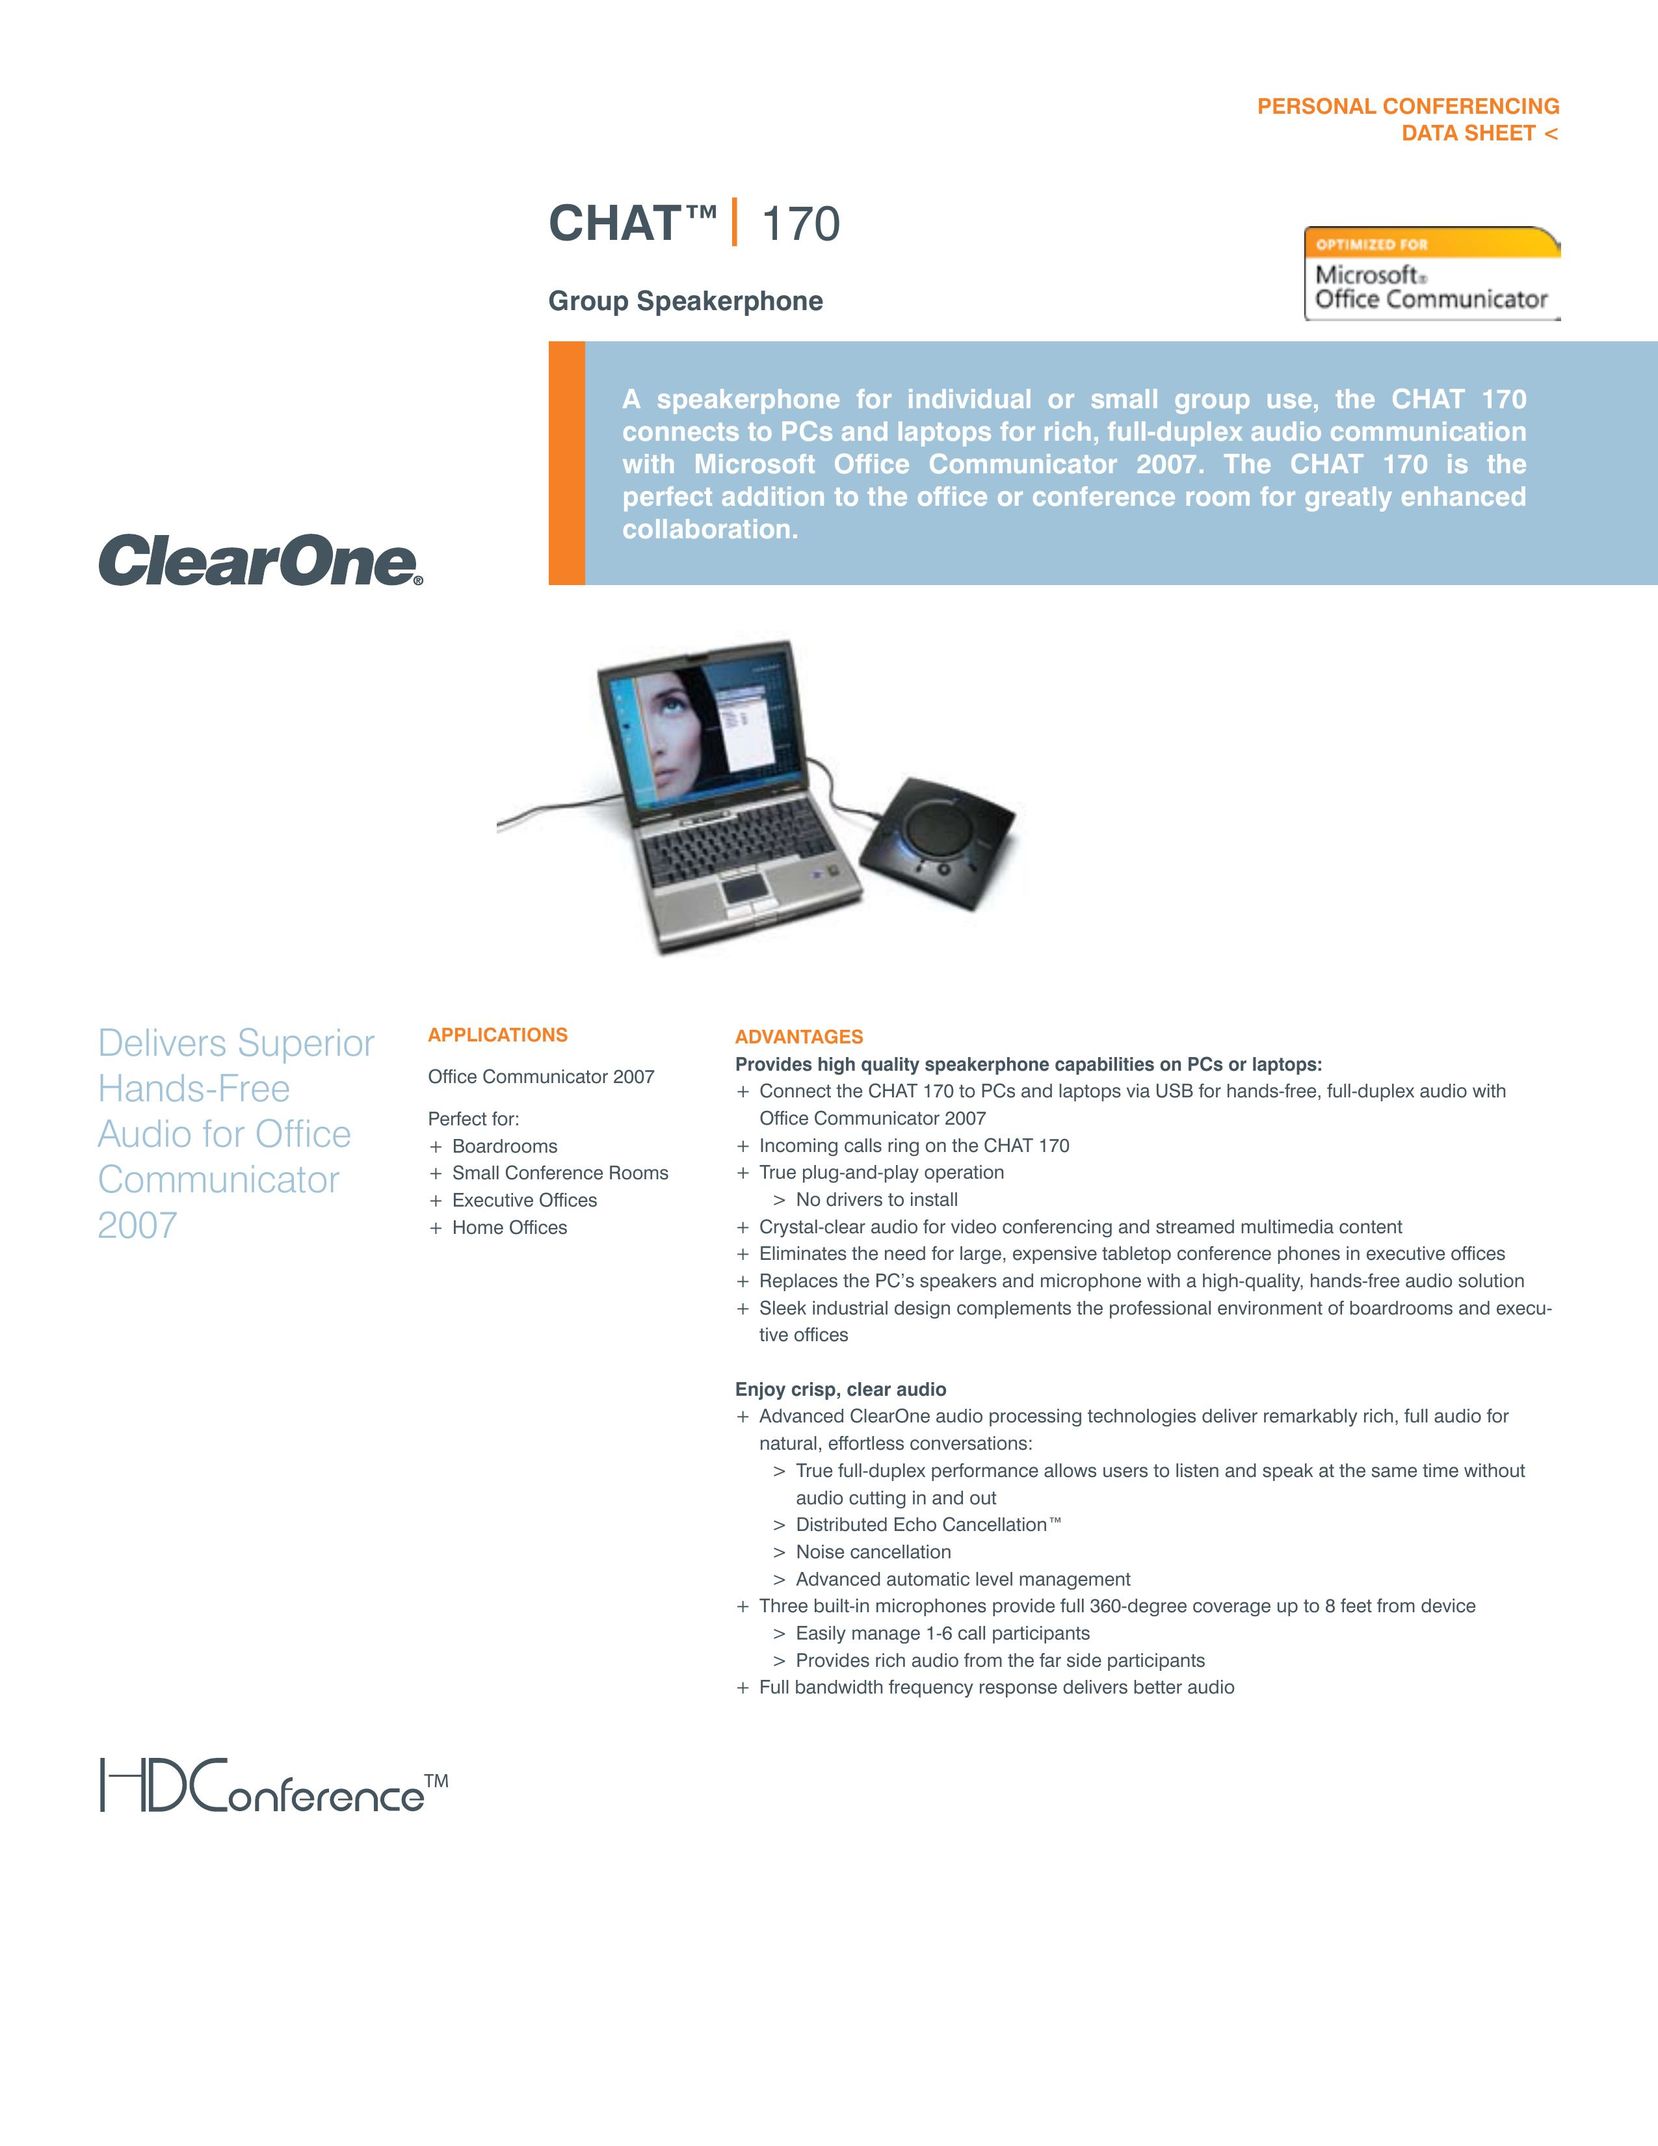 ClearOne comm 170 Conference Phone User Manual